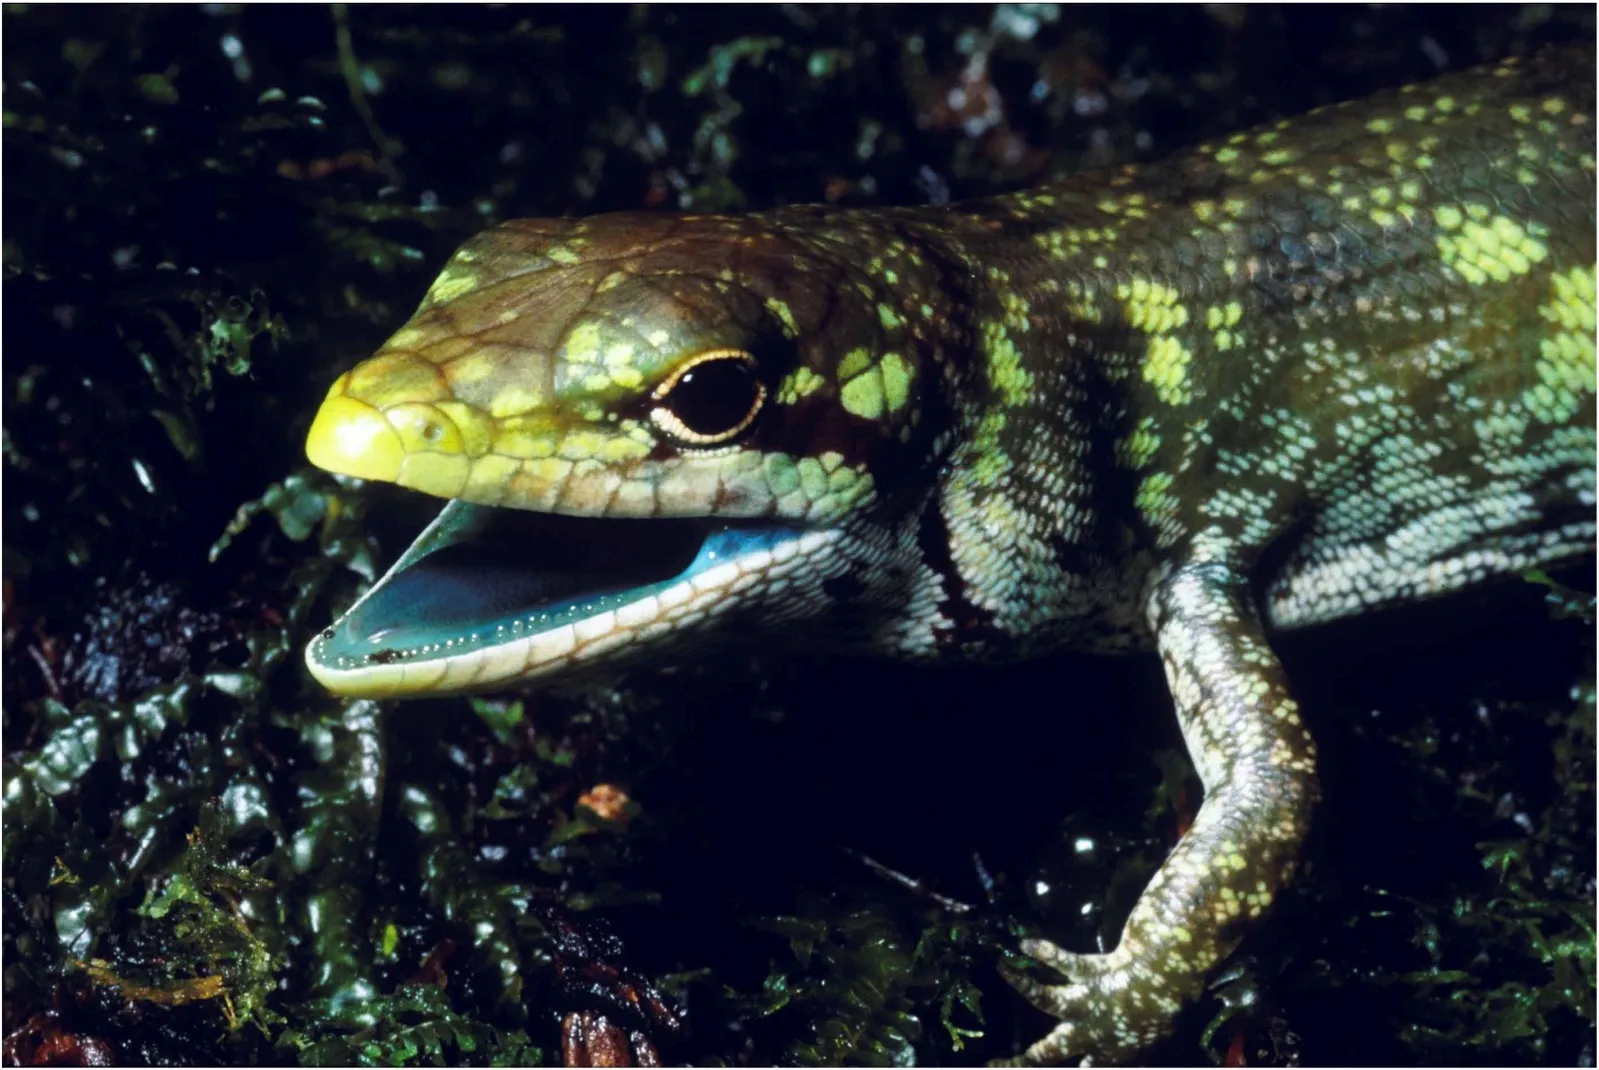 These Lizards Evolved Toxic Green Blood | Smart News| Smithsonian Magazine